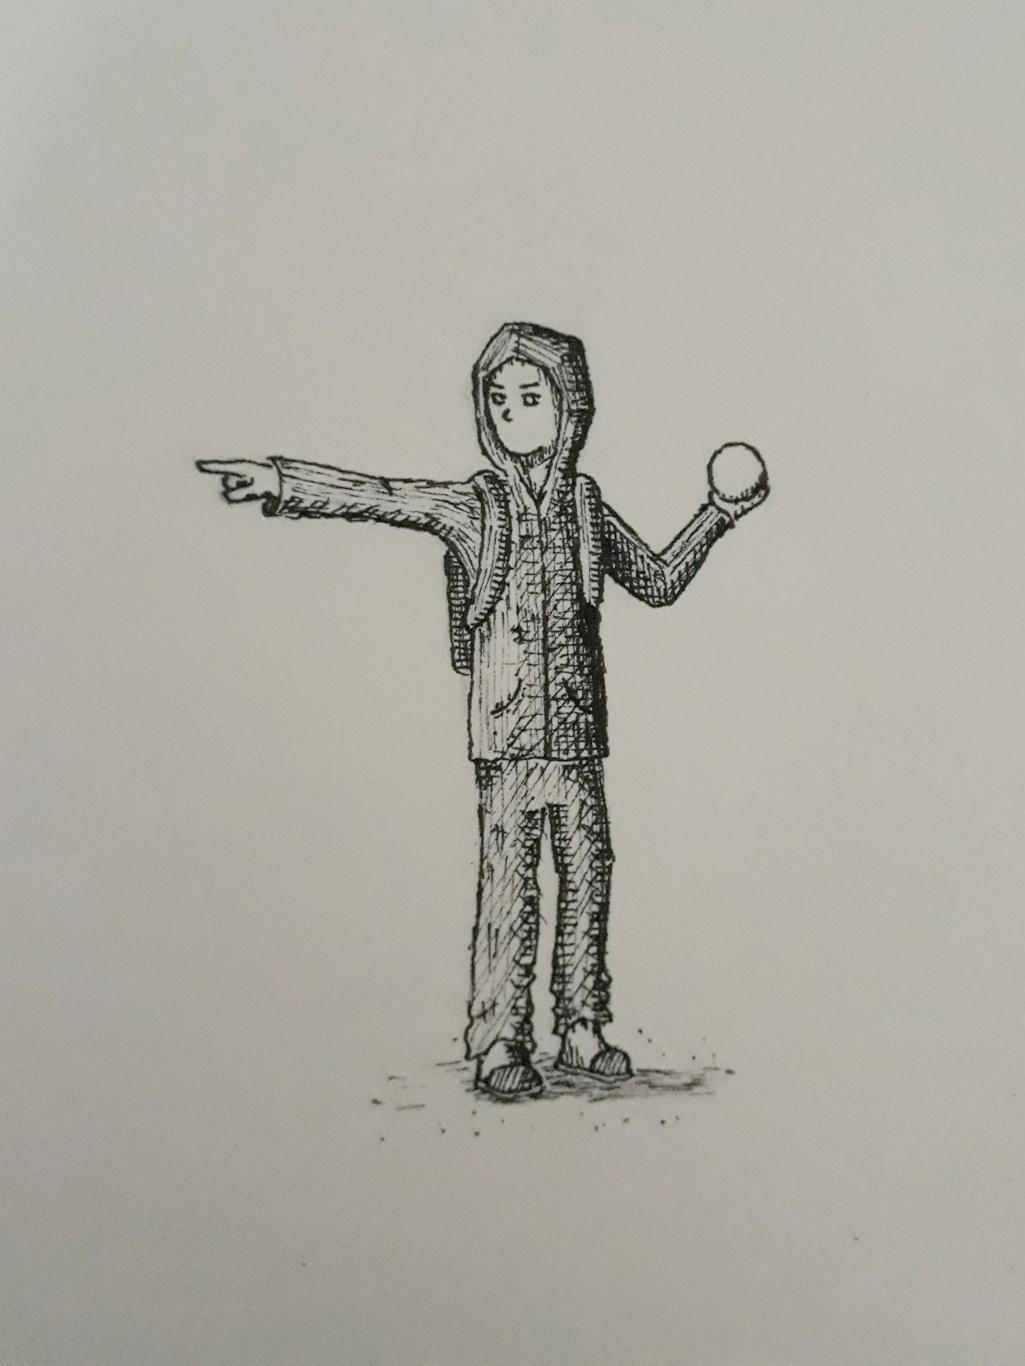 drawing of a hooded person throwing a snowball